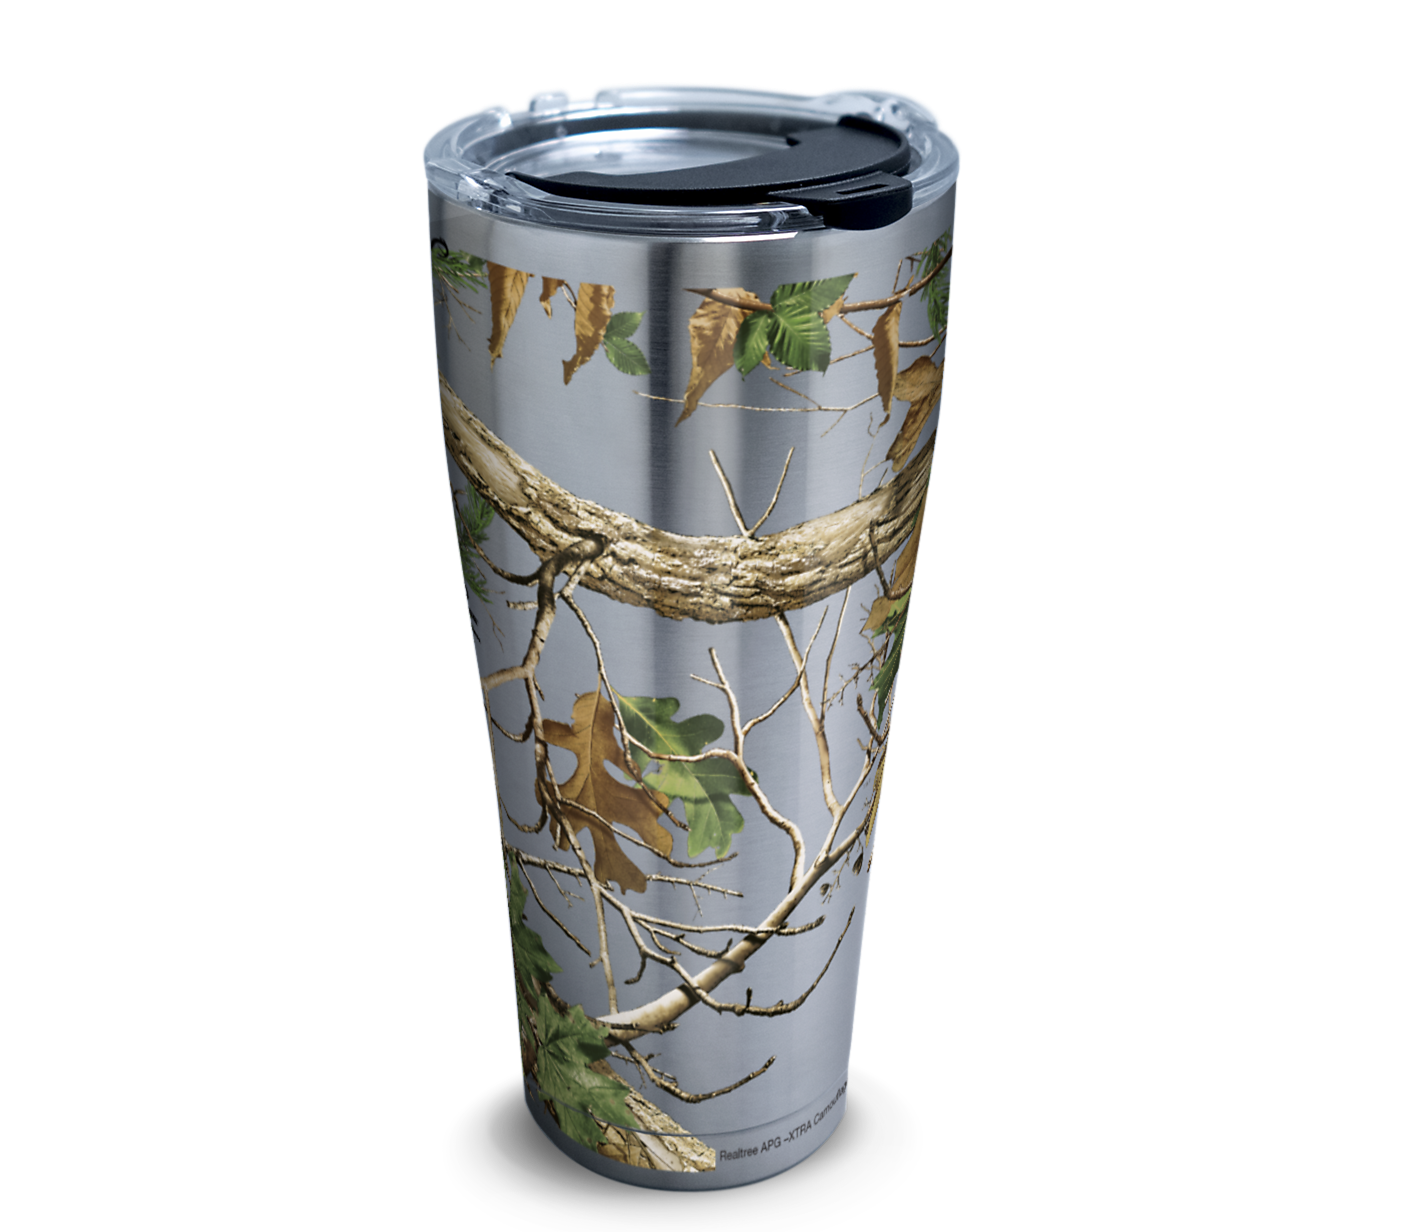 Tervis Stainless-Steel Tumbler in Realtree Xtra Green